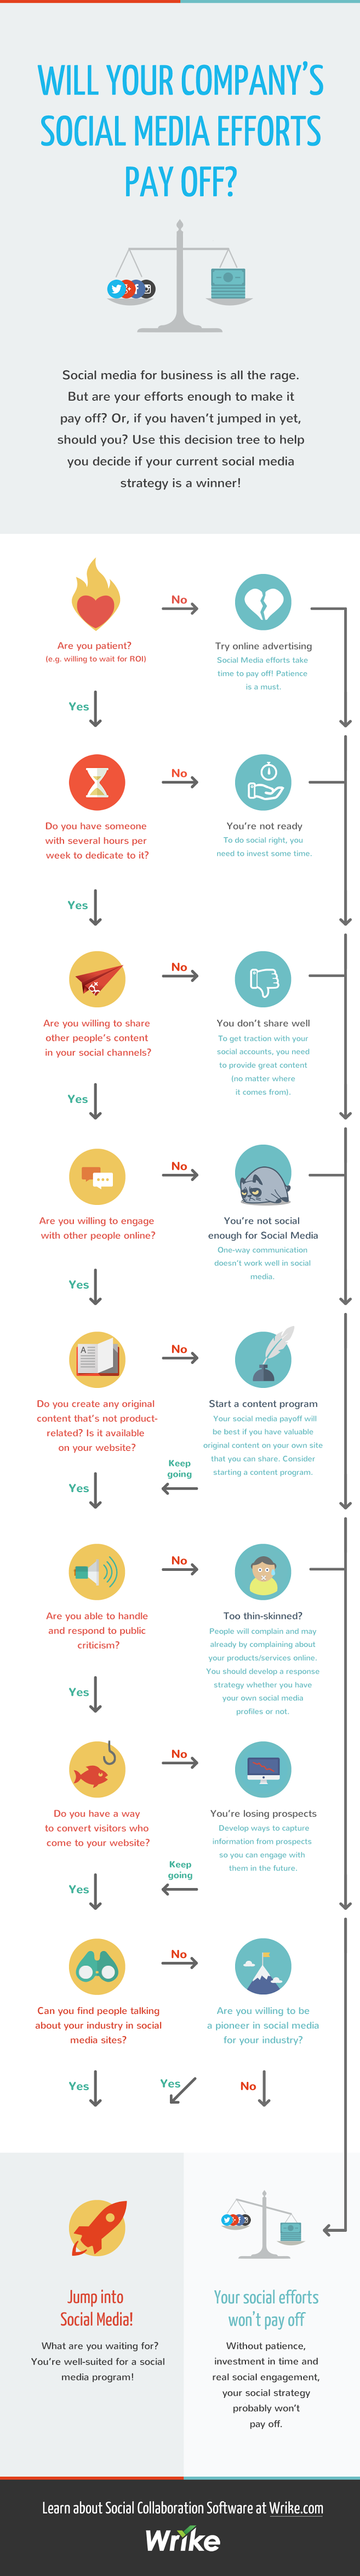 Social Media Marketing For Small Business and Organizations - Decision Tree - #infographic #startups